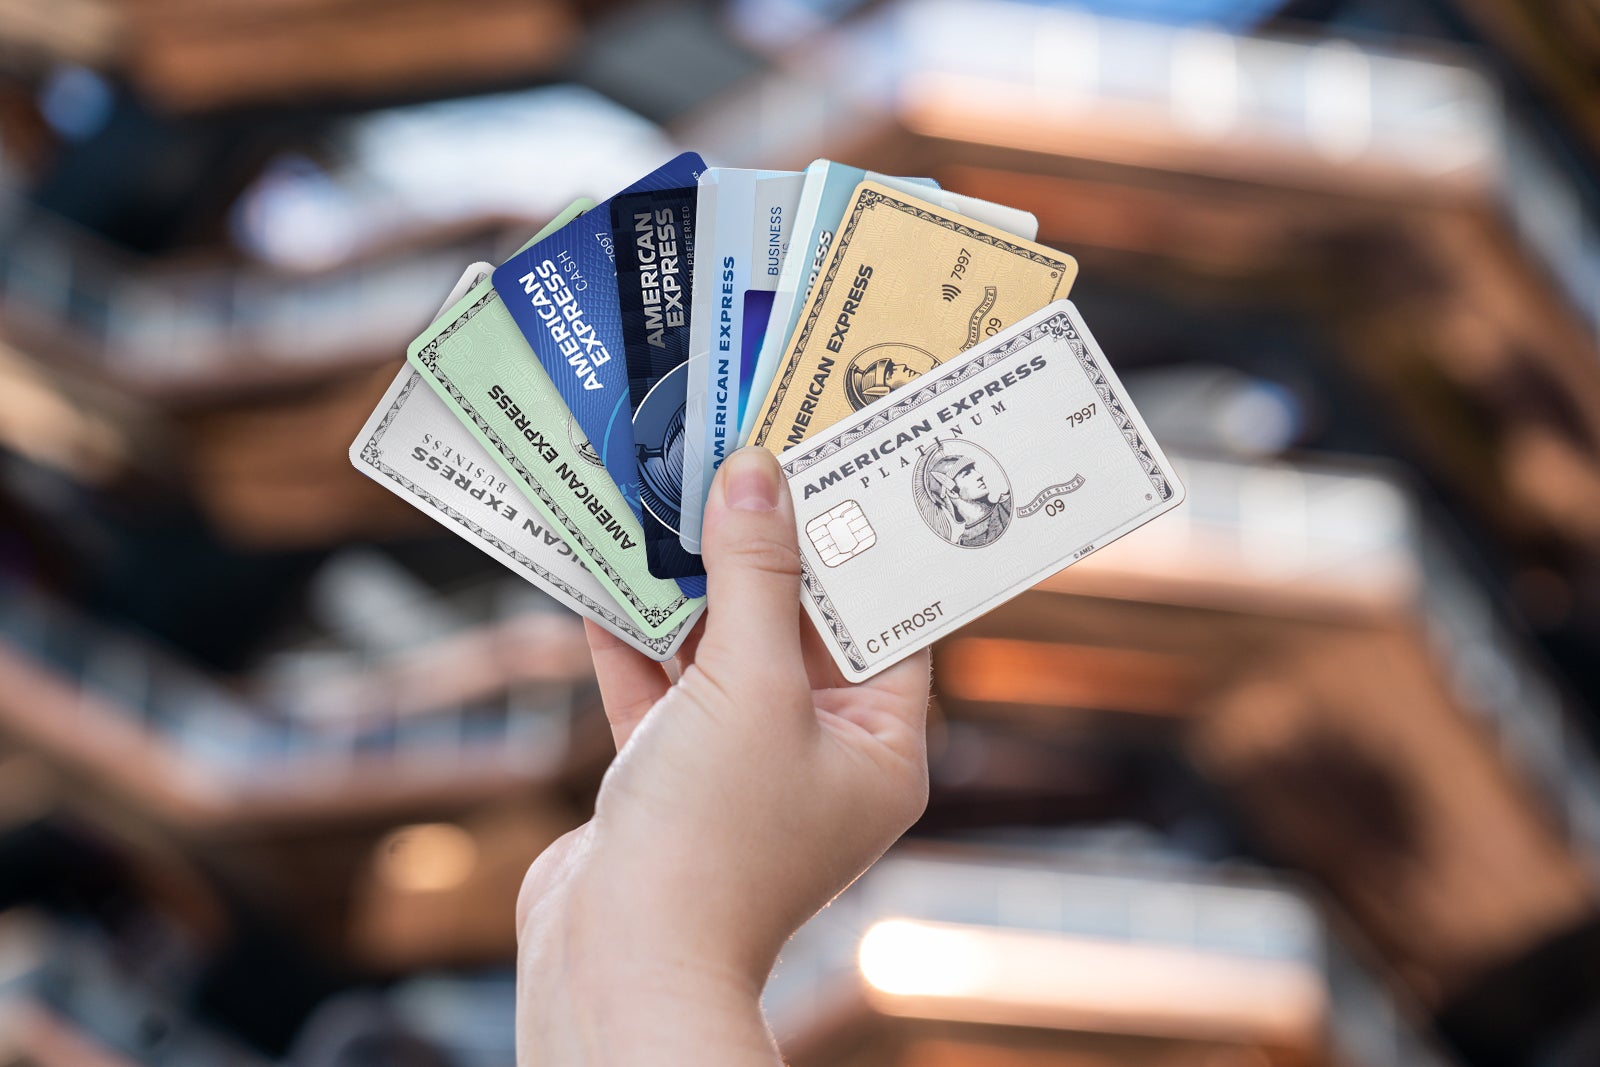 American Express Membership Rewards: The ultimate guide - The